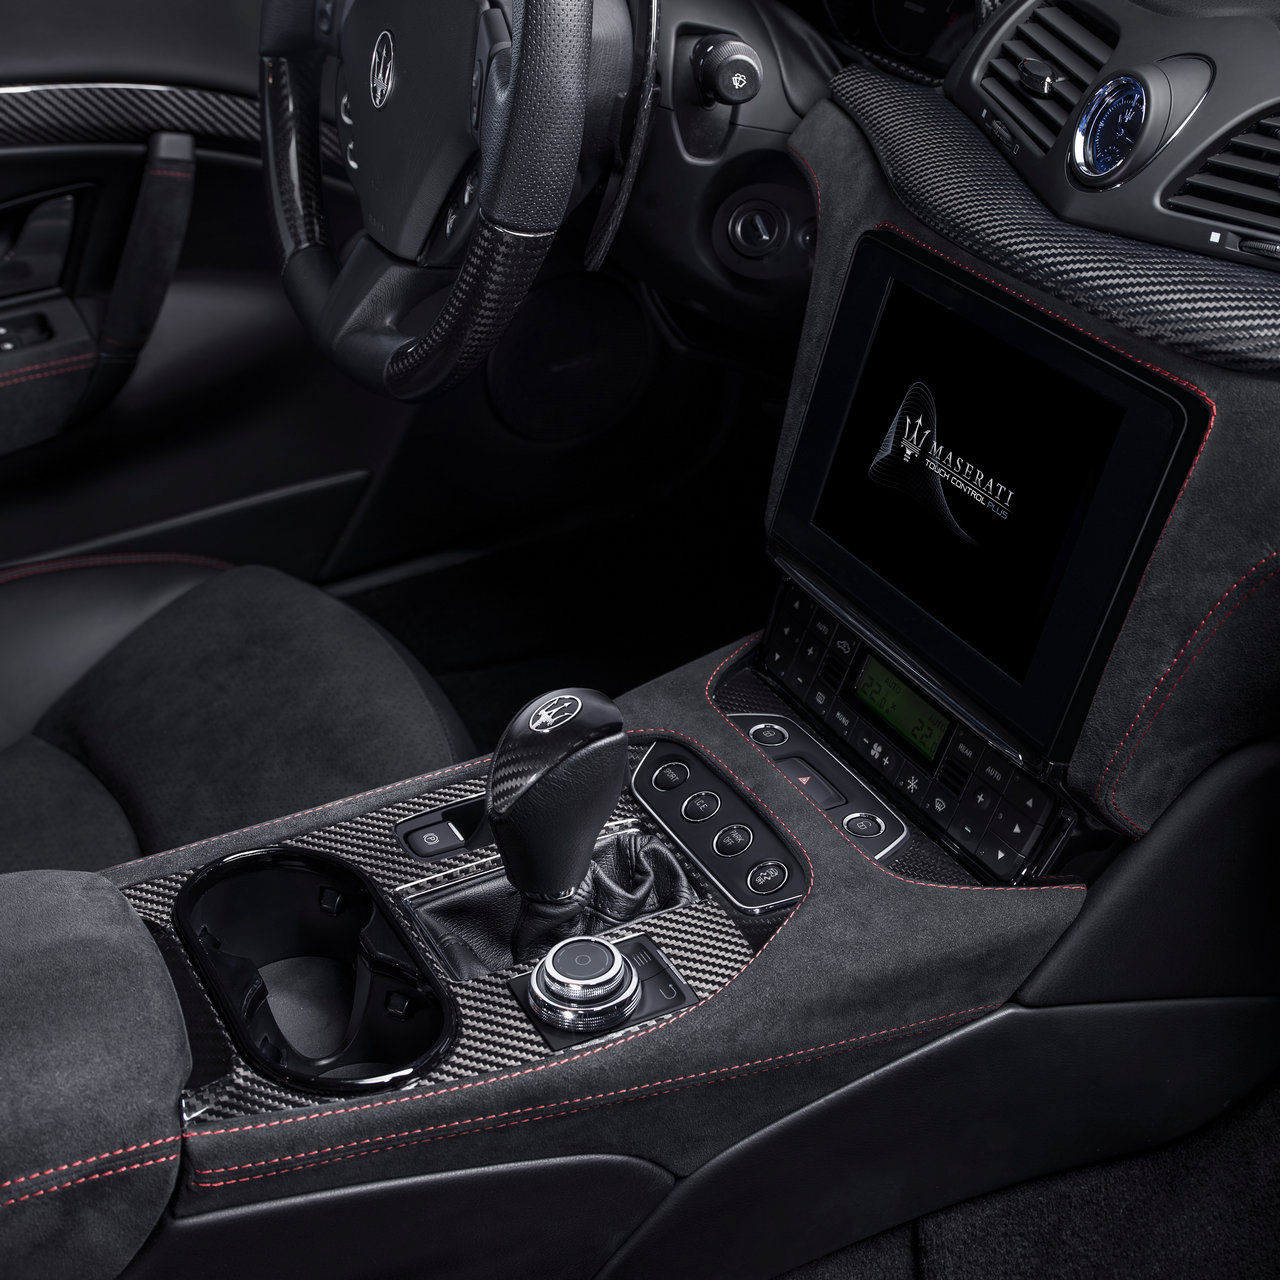 Maserati luxury interiors - A detail with black leather